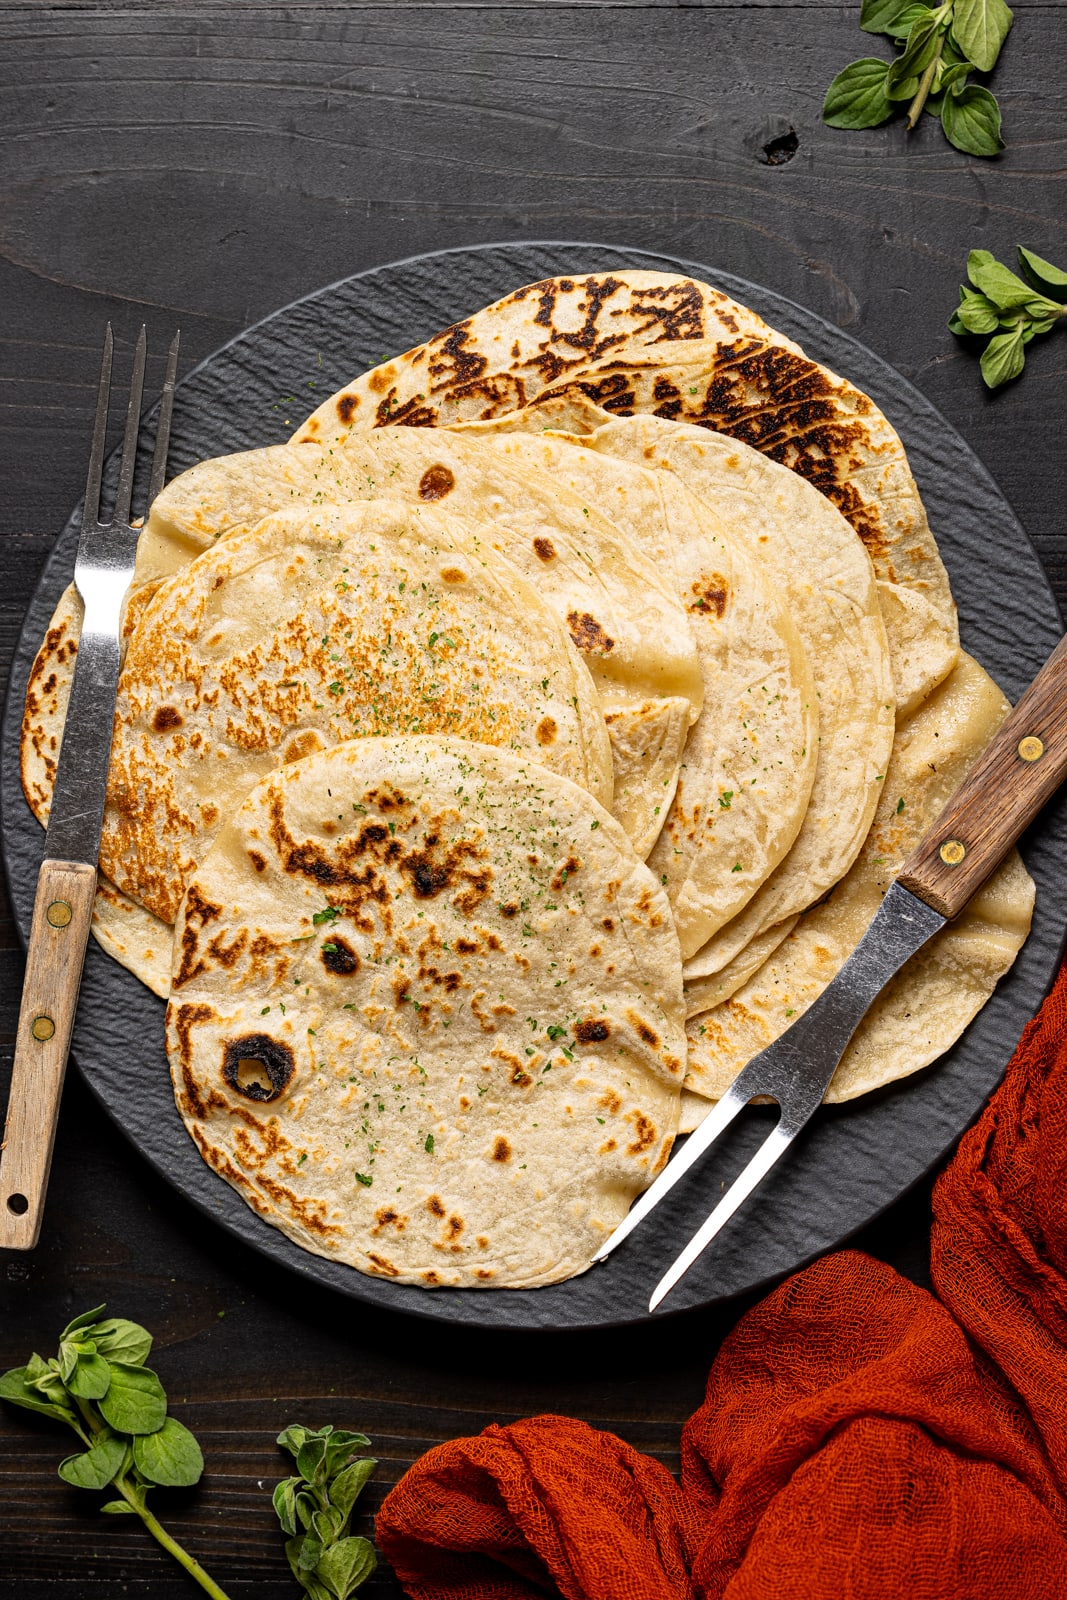 Tortillas on a black plate with two forks.